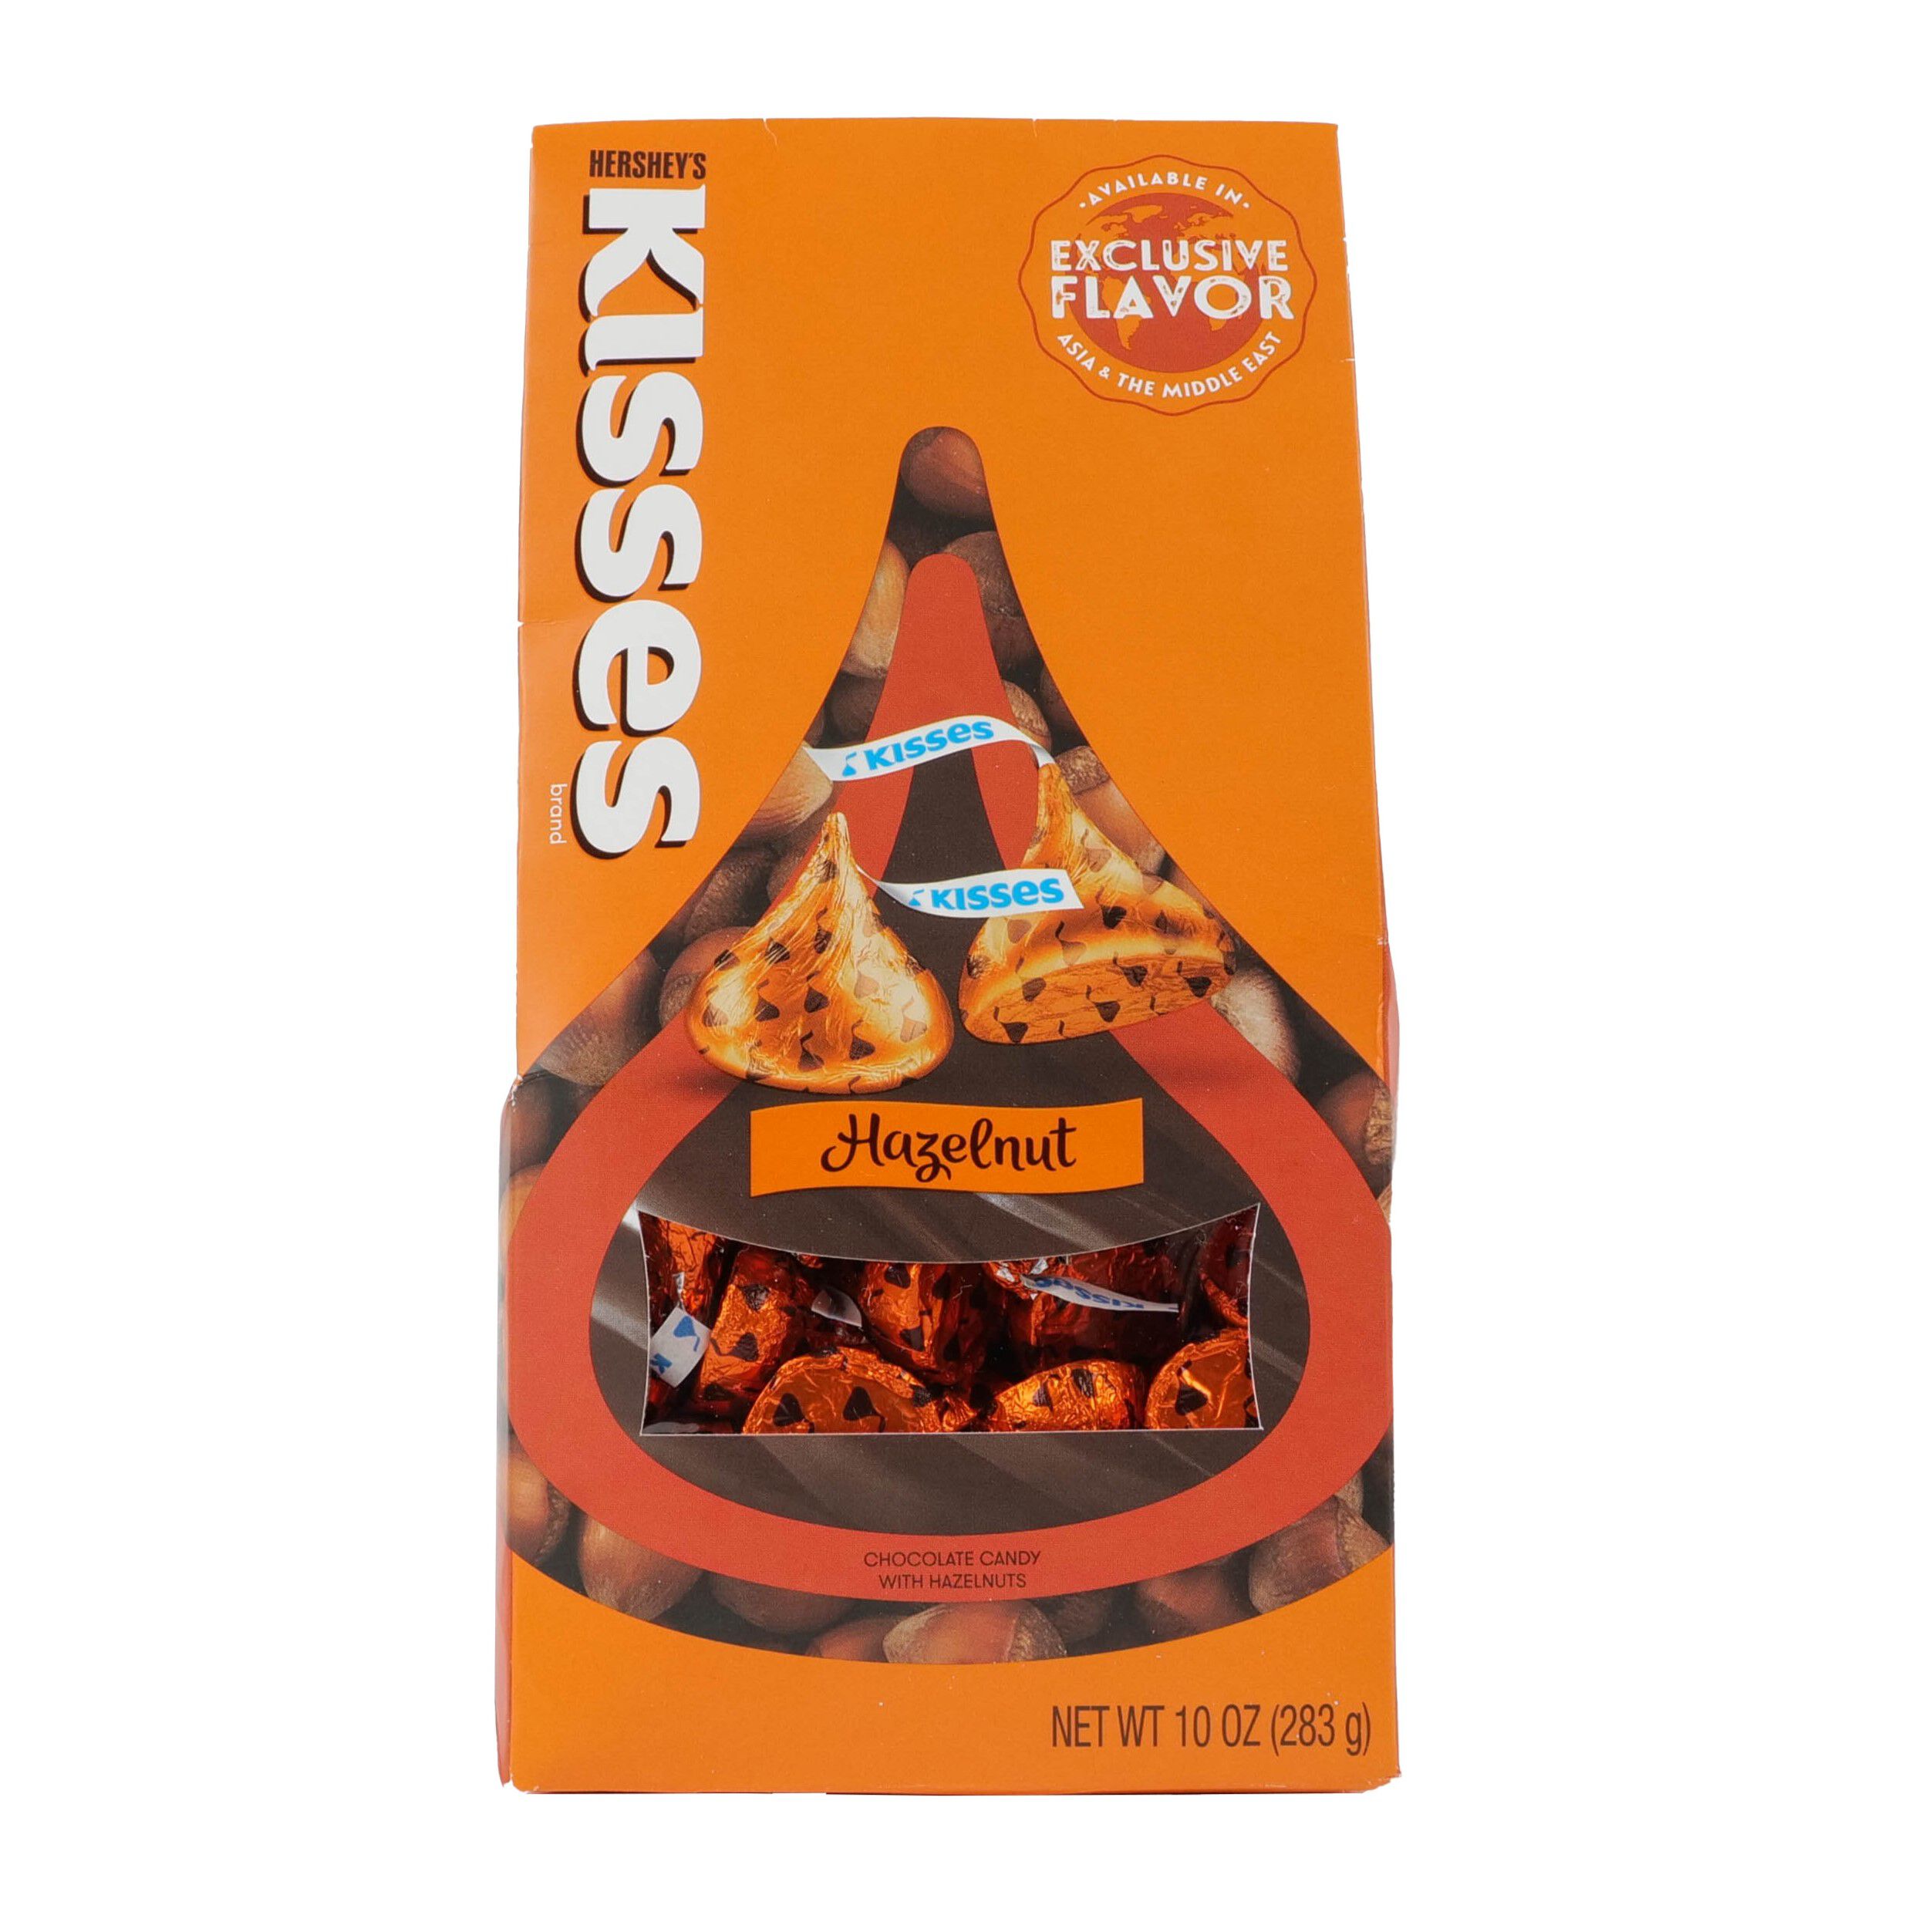 HERSHEY'S KISSES Flavors of The World Hazelnut 10oz Pouch